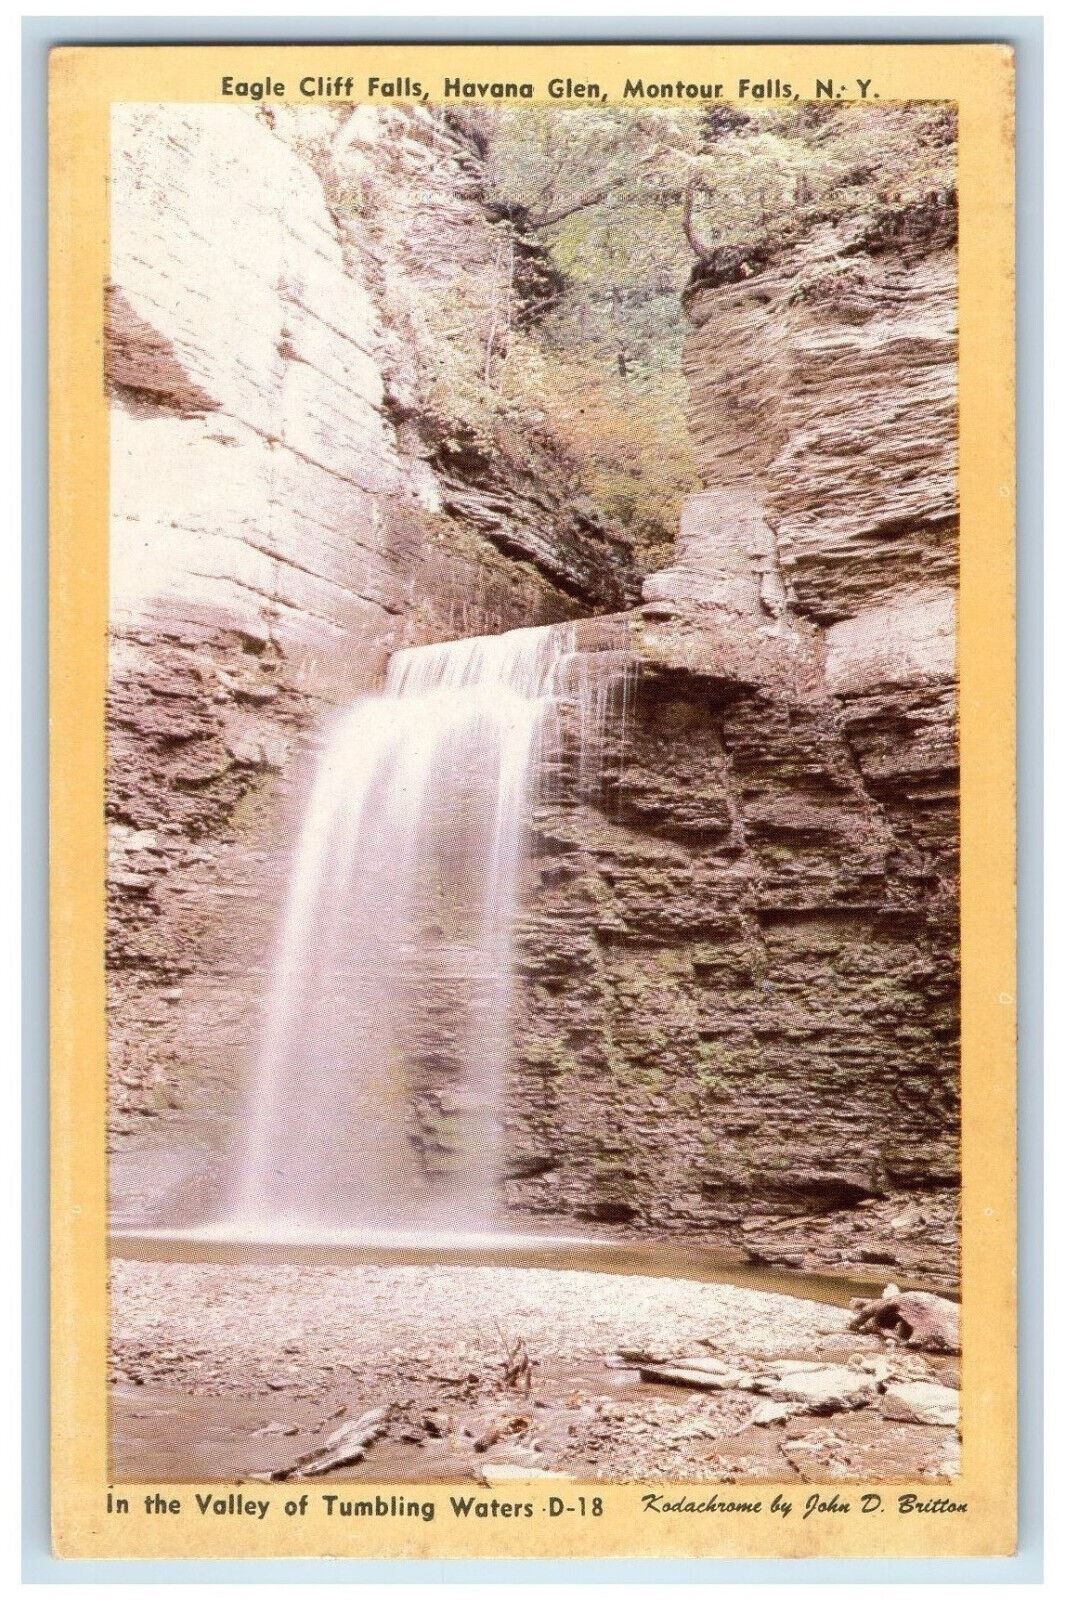 c1960's Valley of Tumbling Waters Eagle Cliff Falls Montour Falls NY Postcard